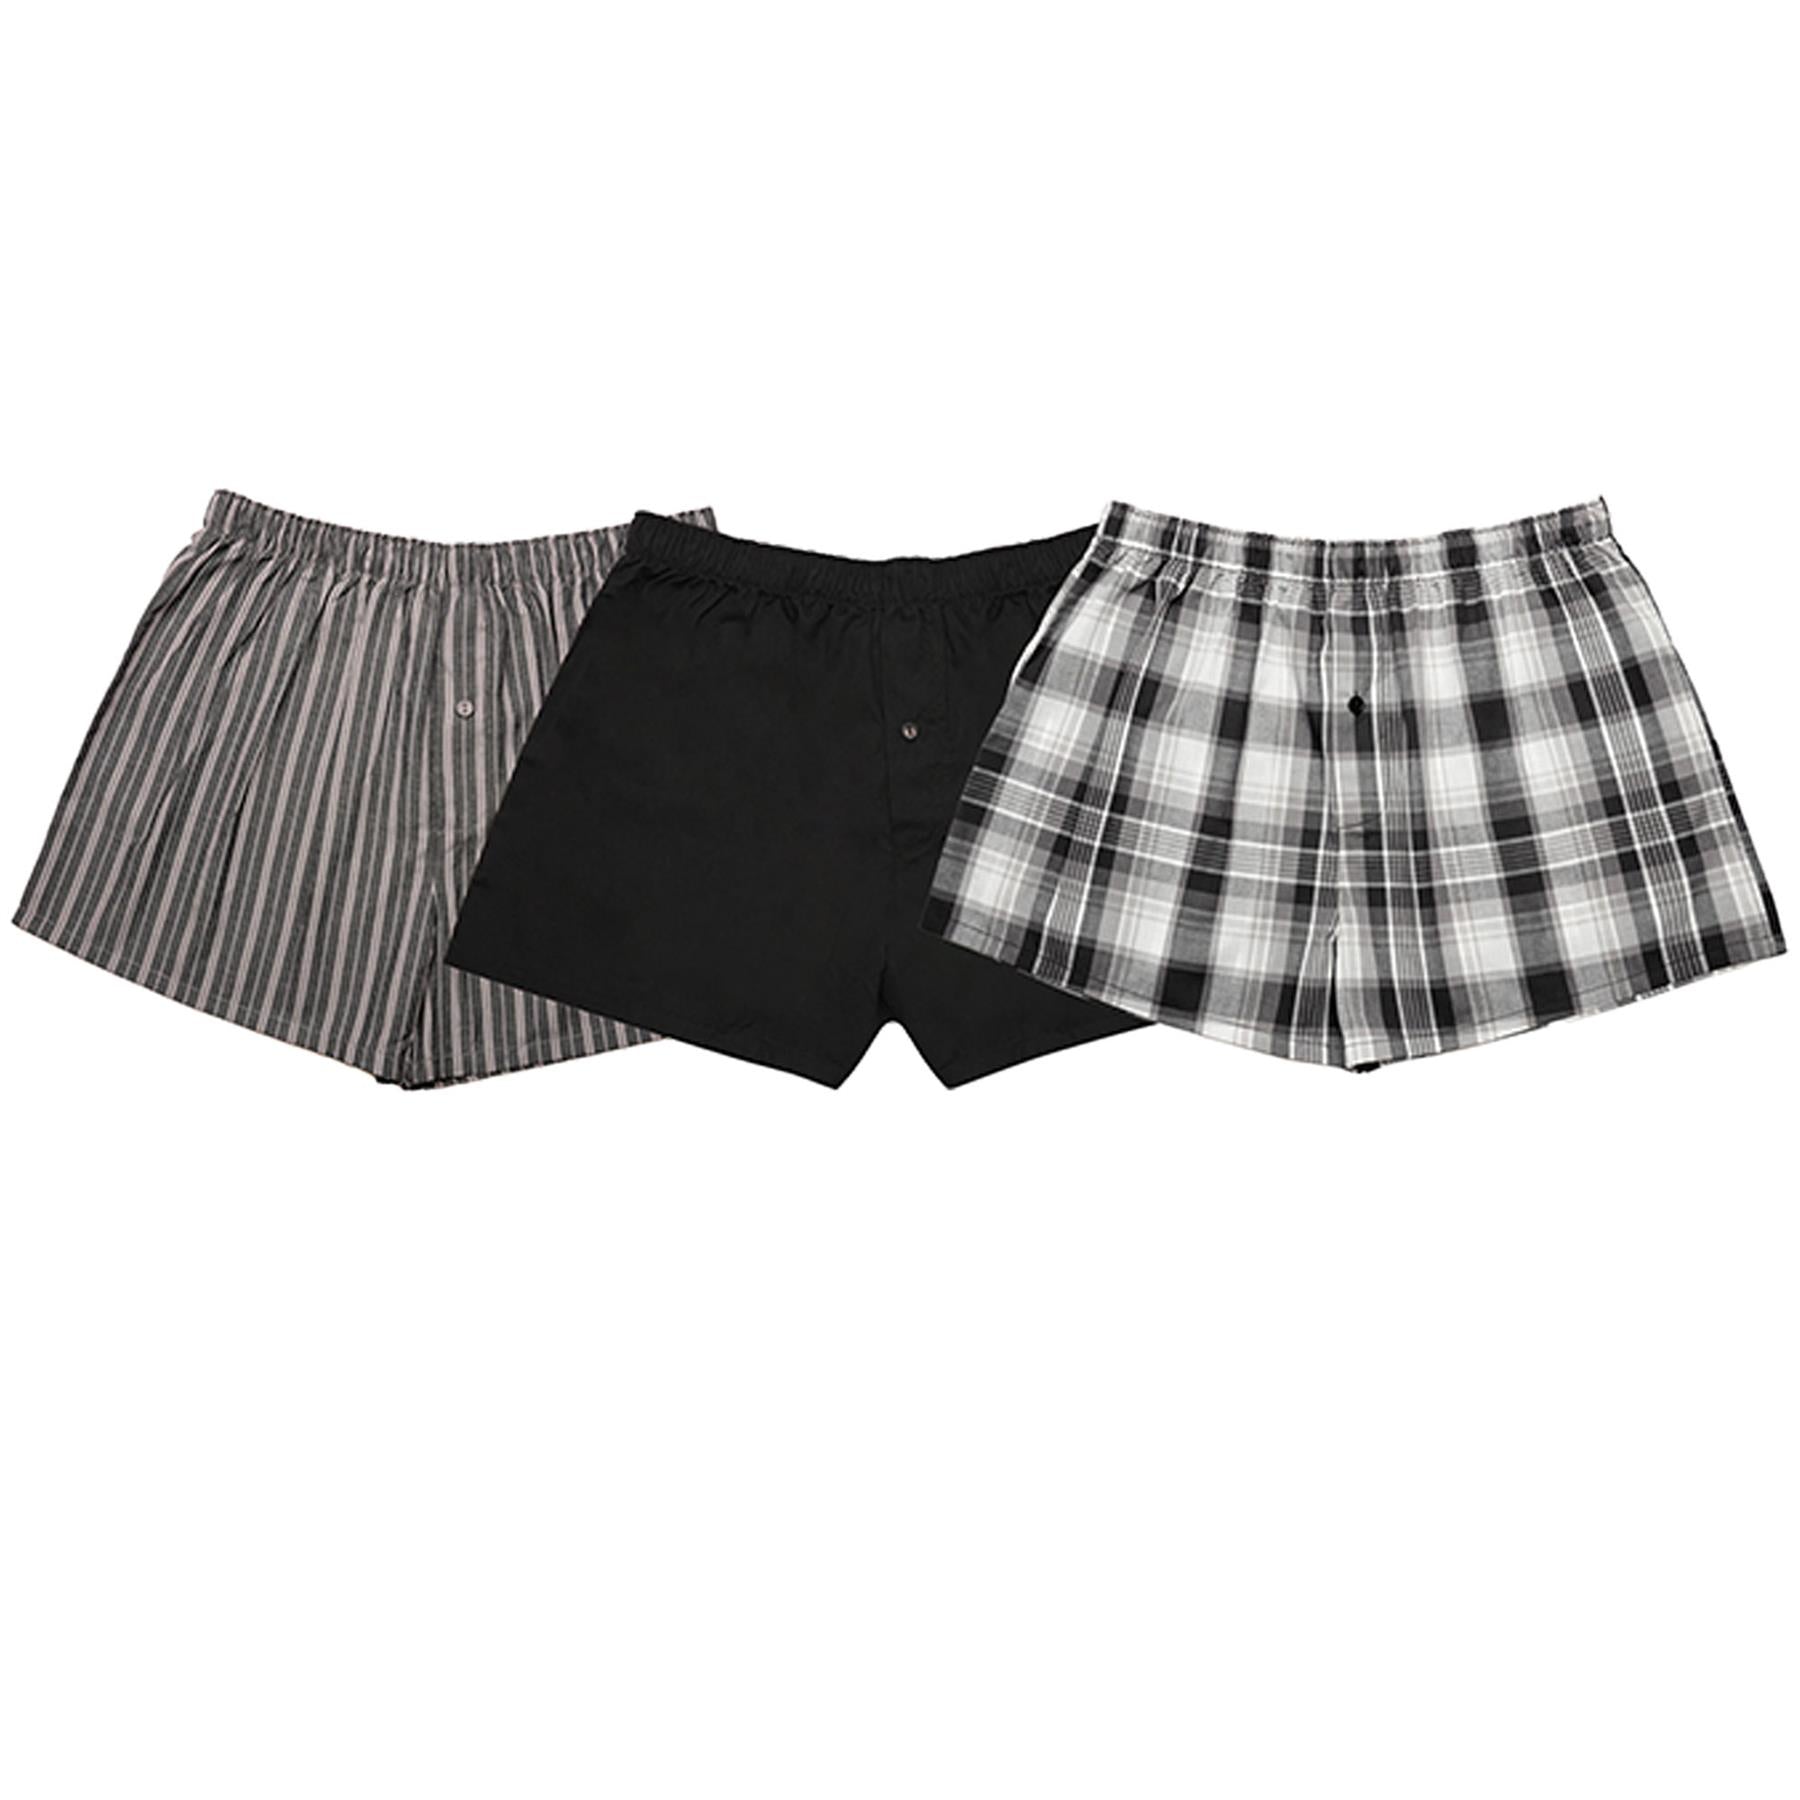 Mens Check Woven Boxer Shorts Underwear Pack Of 3 Knickers Elasticated Waistband